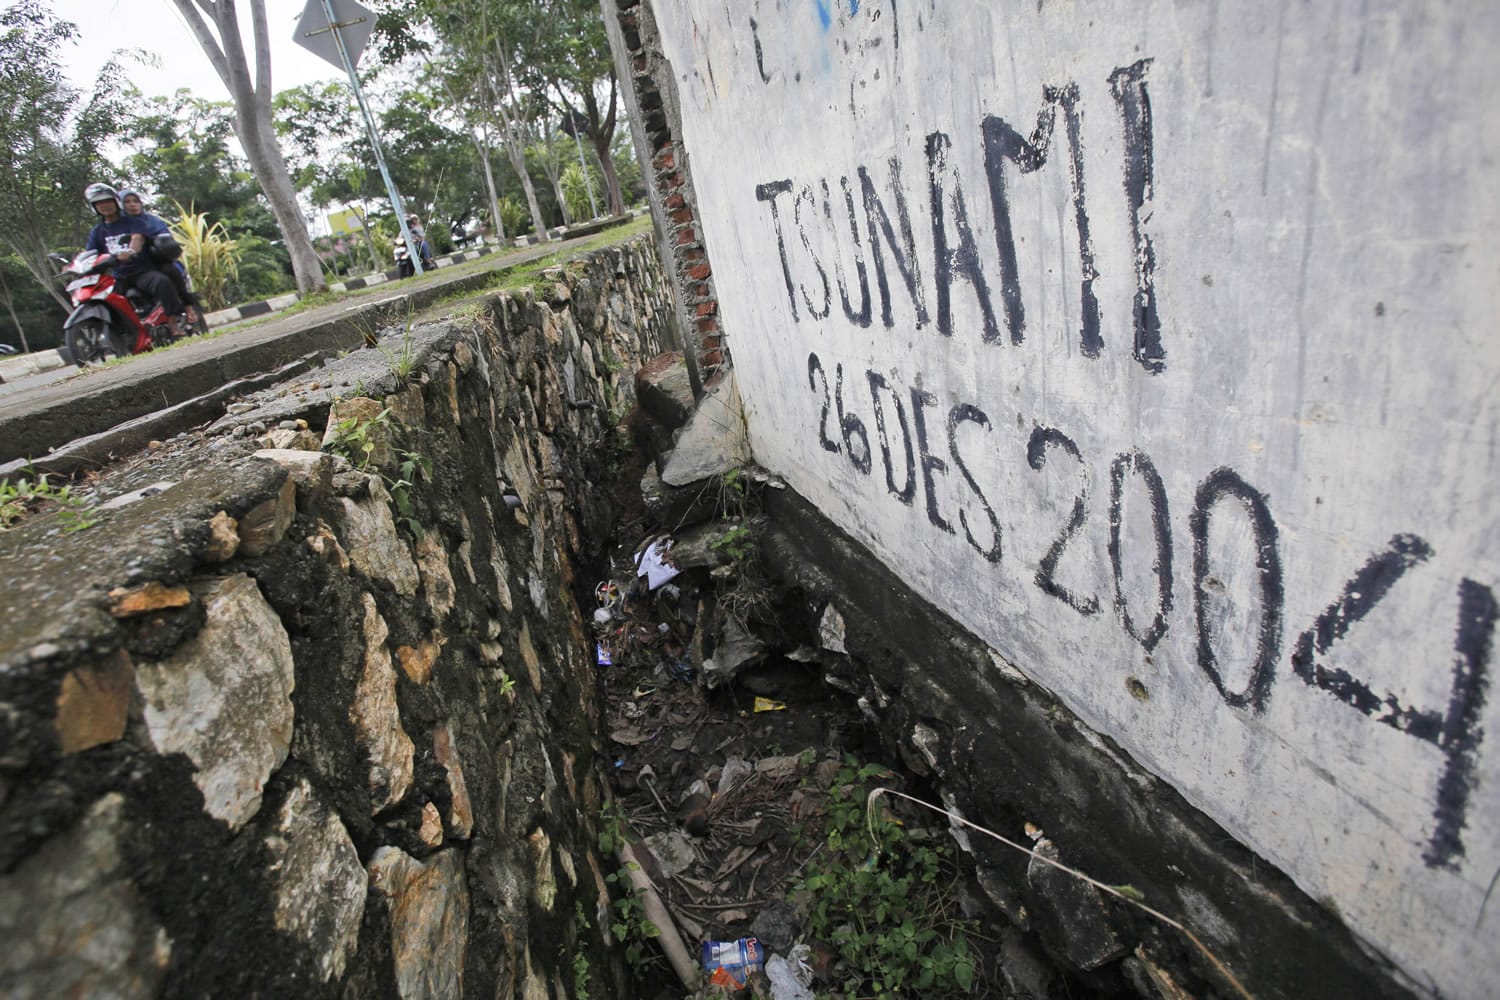 Motorists on Friday ride past graffiti with the date of the Indian Ocean tsunami, in Banda Aceh, Aceh province, Indonesia. The devastating Boxing Day tsunami in 2004 struck a dozen countries around the Indian Ocean rim, killing 230,000 people, most of them in Aceh.